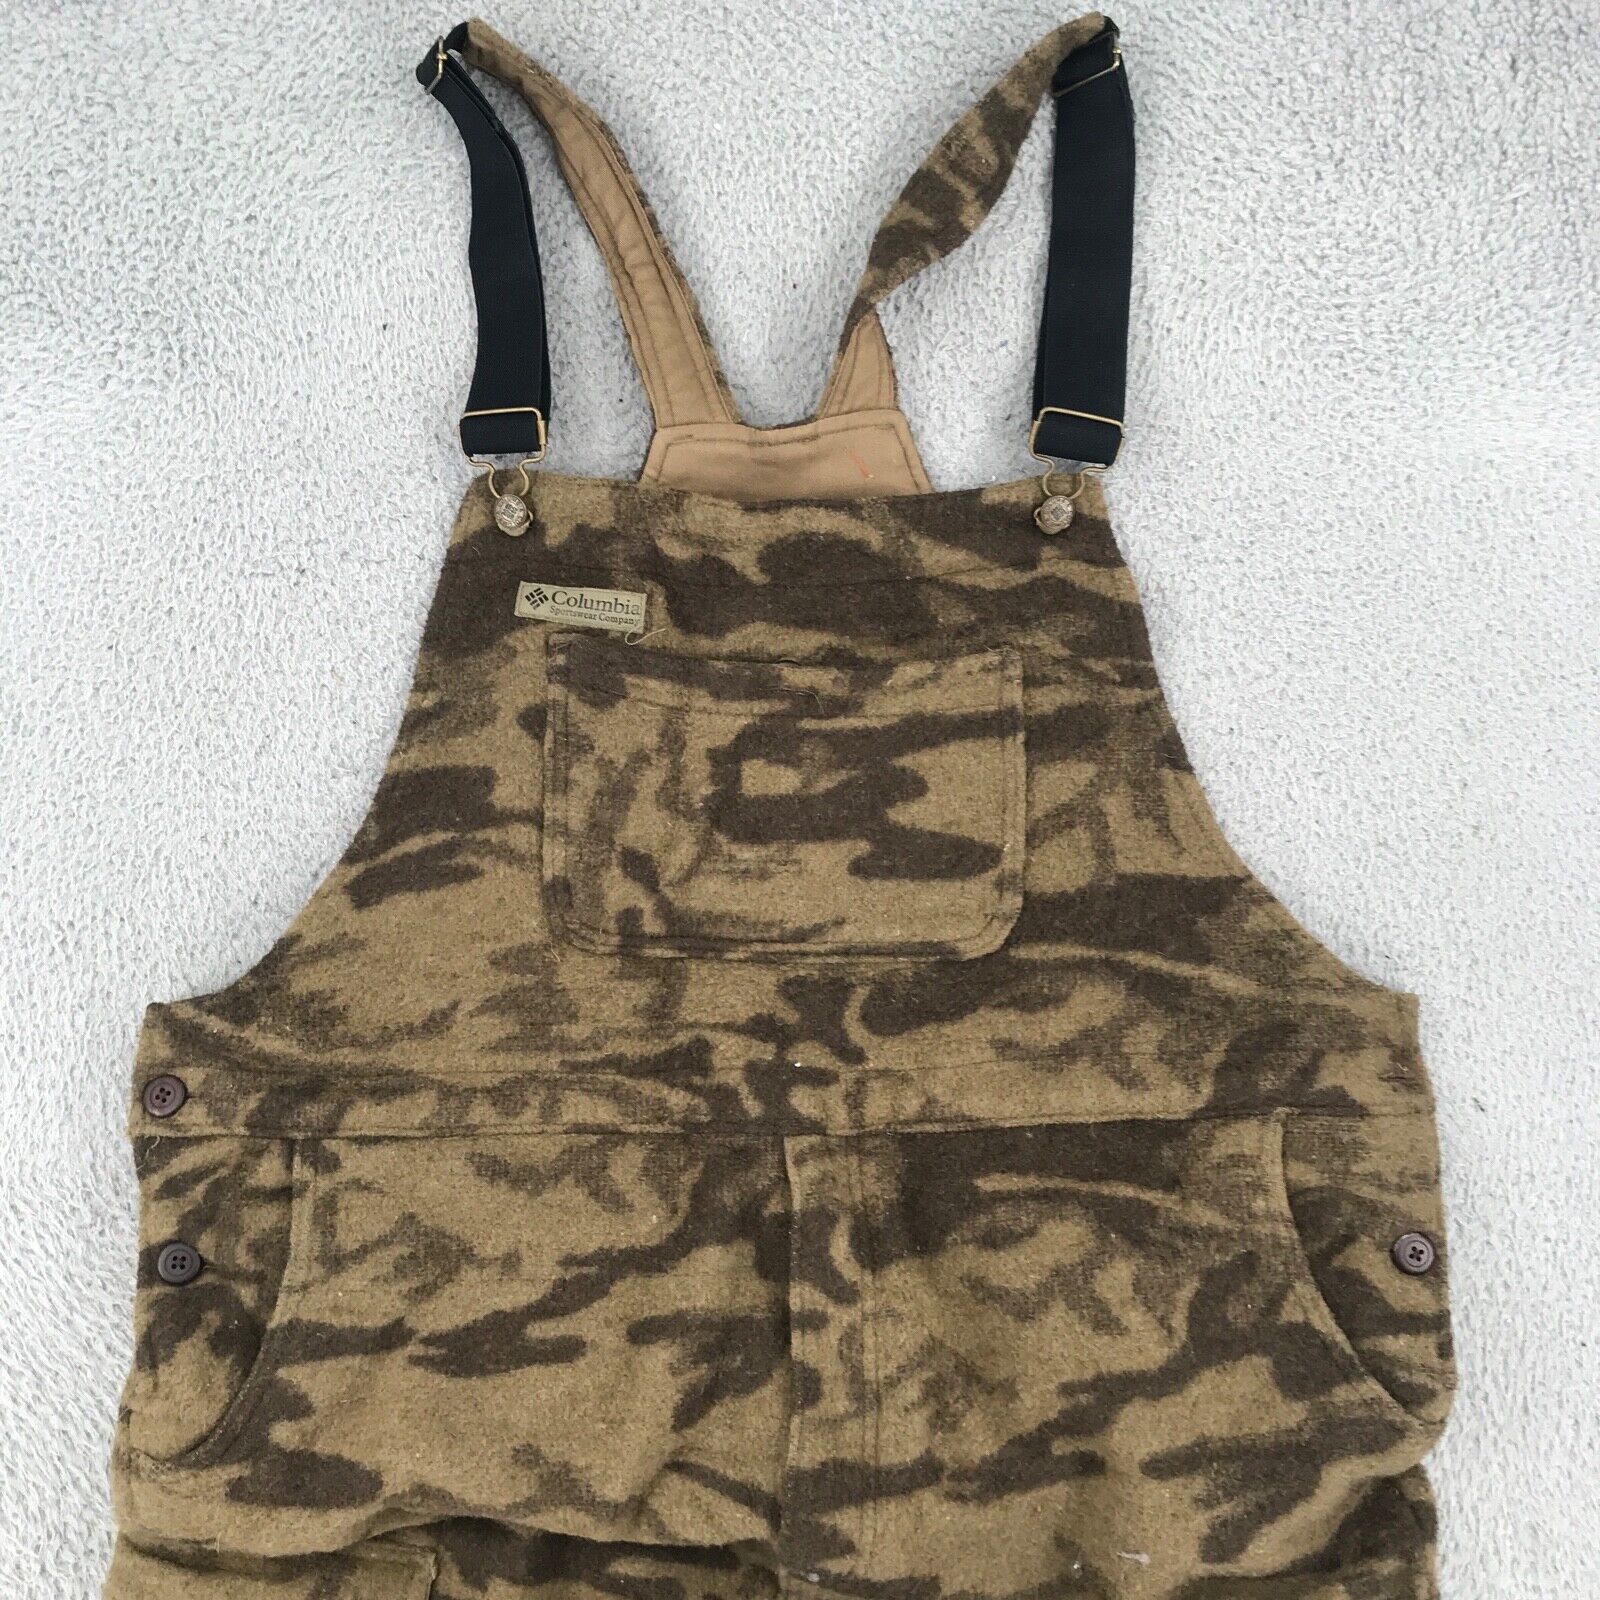 Columbia Overalls Cargo Adult XL Brown Wool Camouflage Hunting Bib 13331